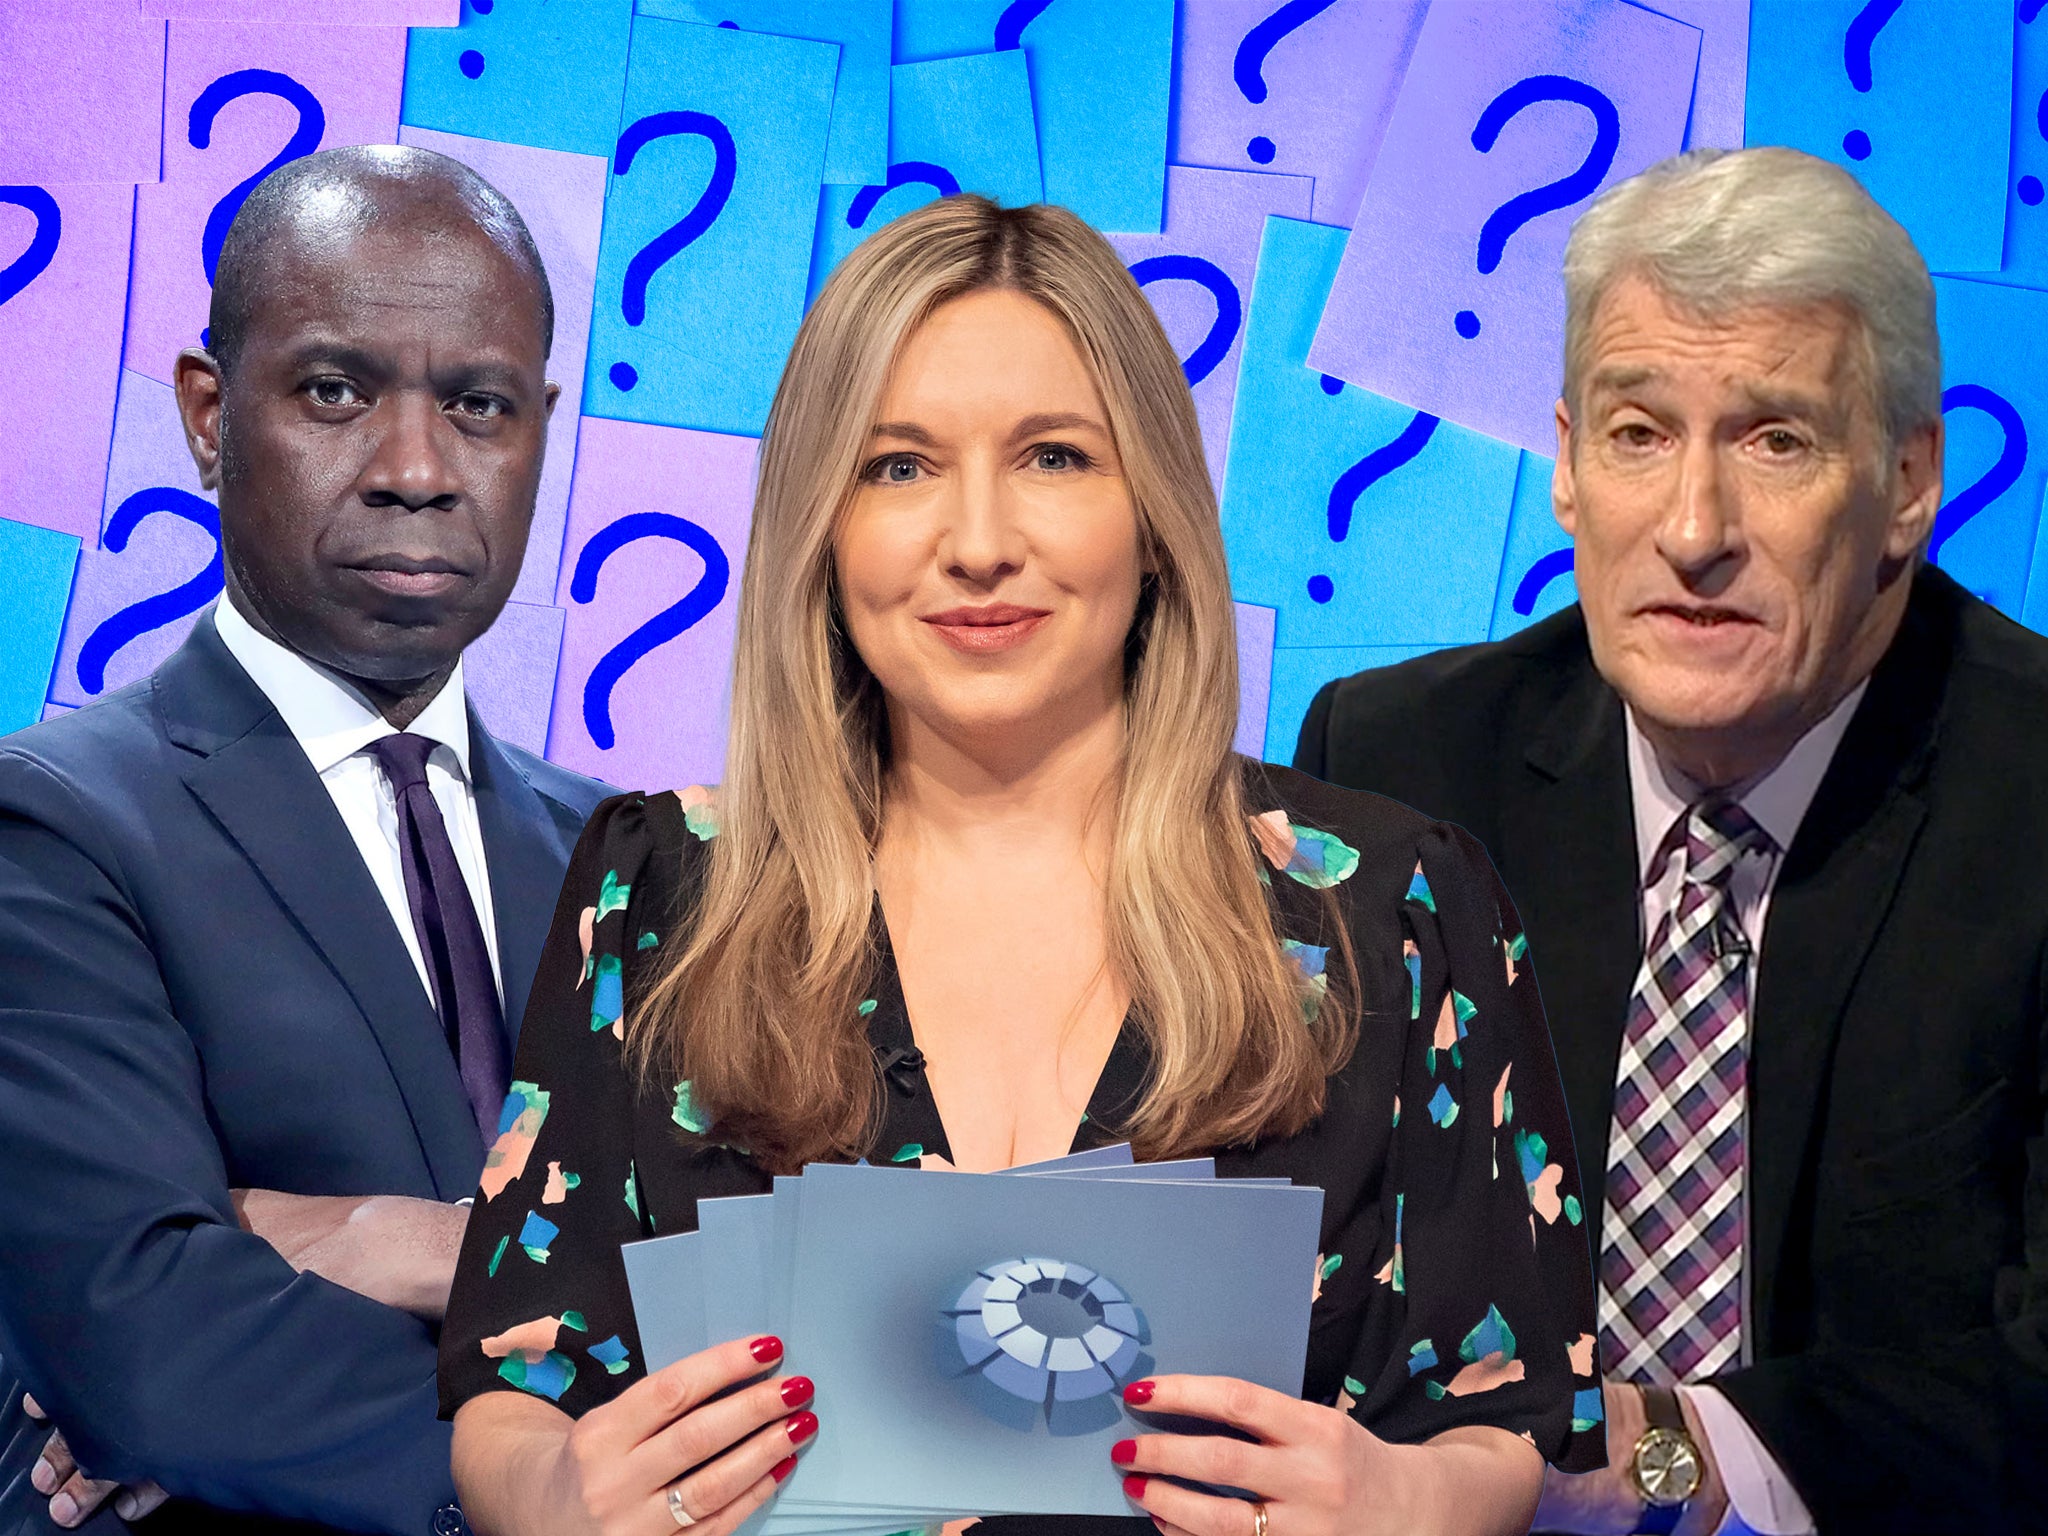 Quiz masters Clive Myrie, Victoria Coren Mitchell and Jeremy Paxman